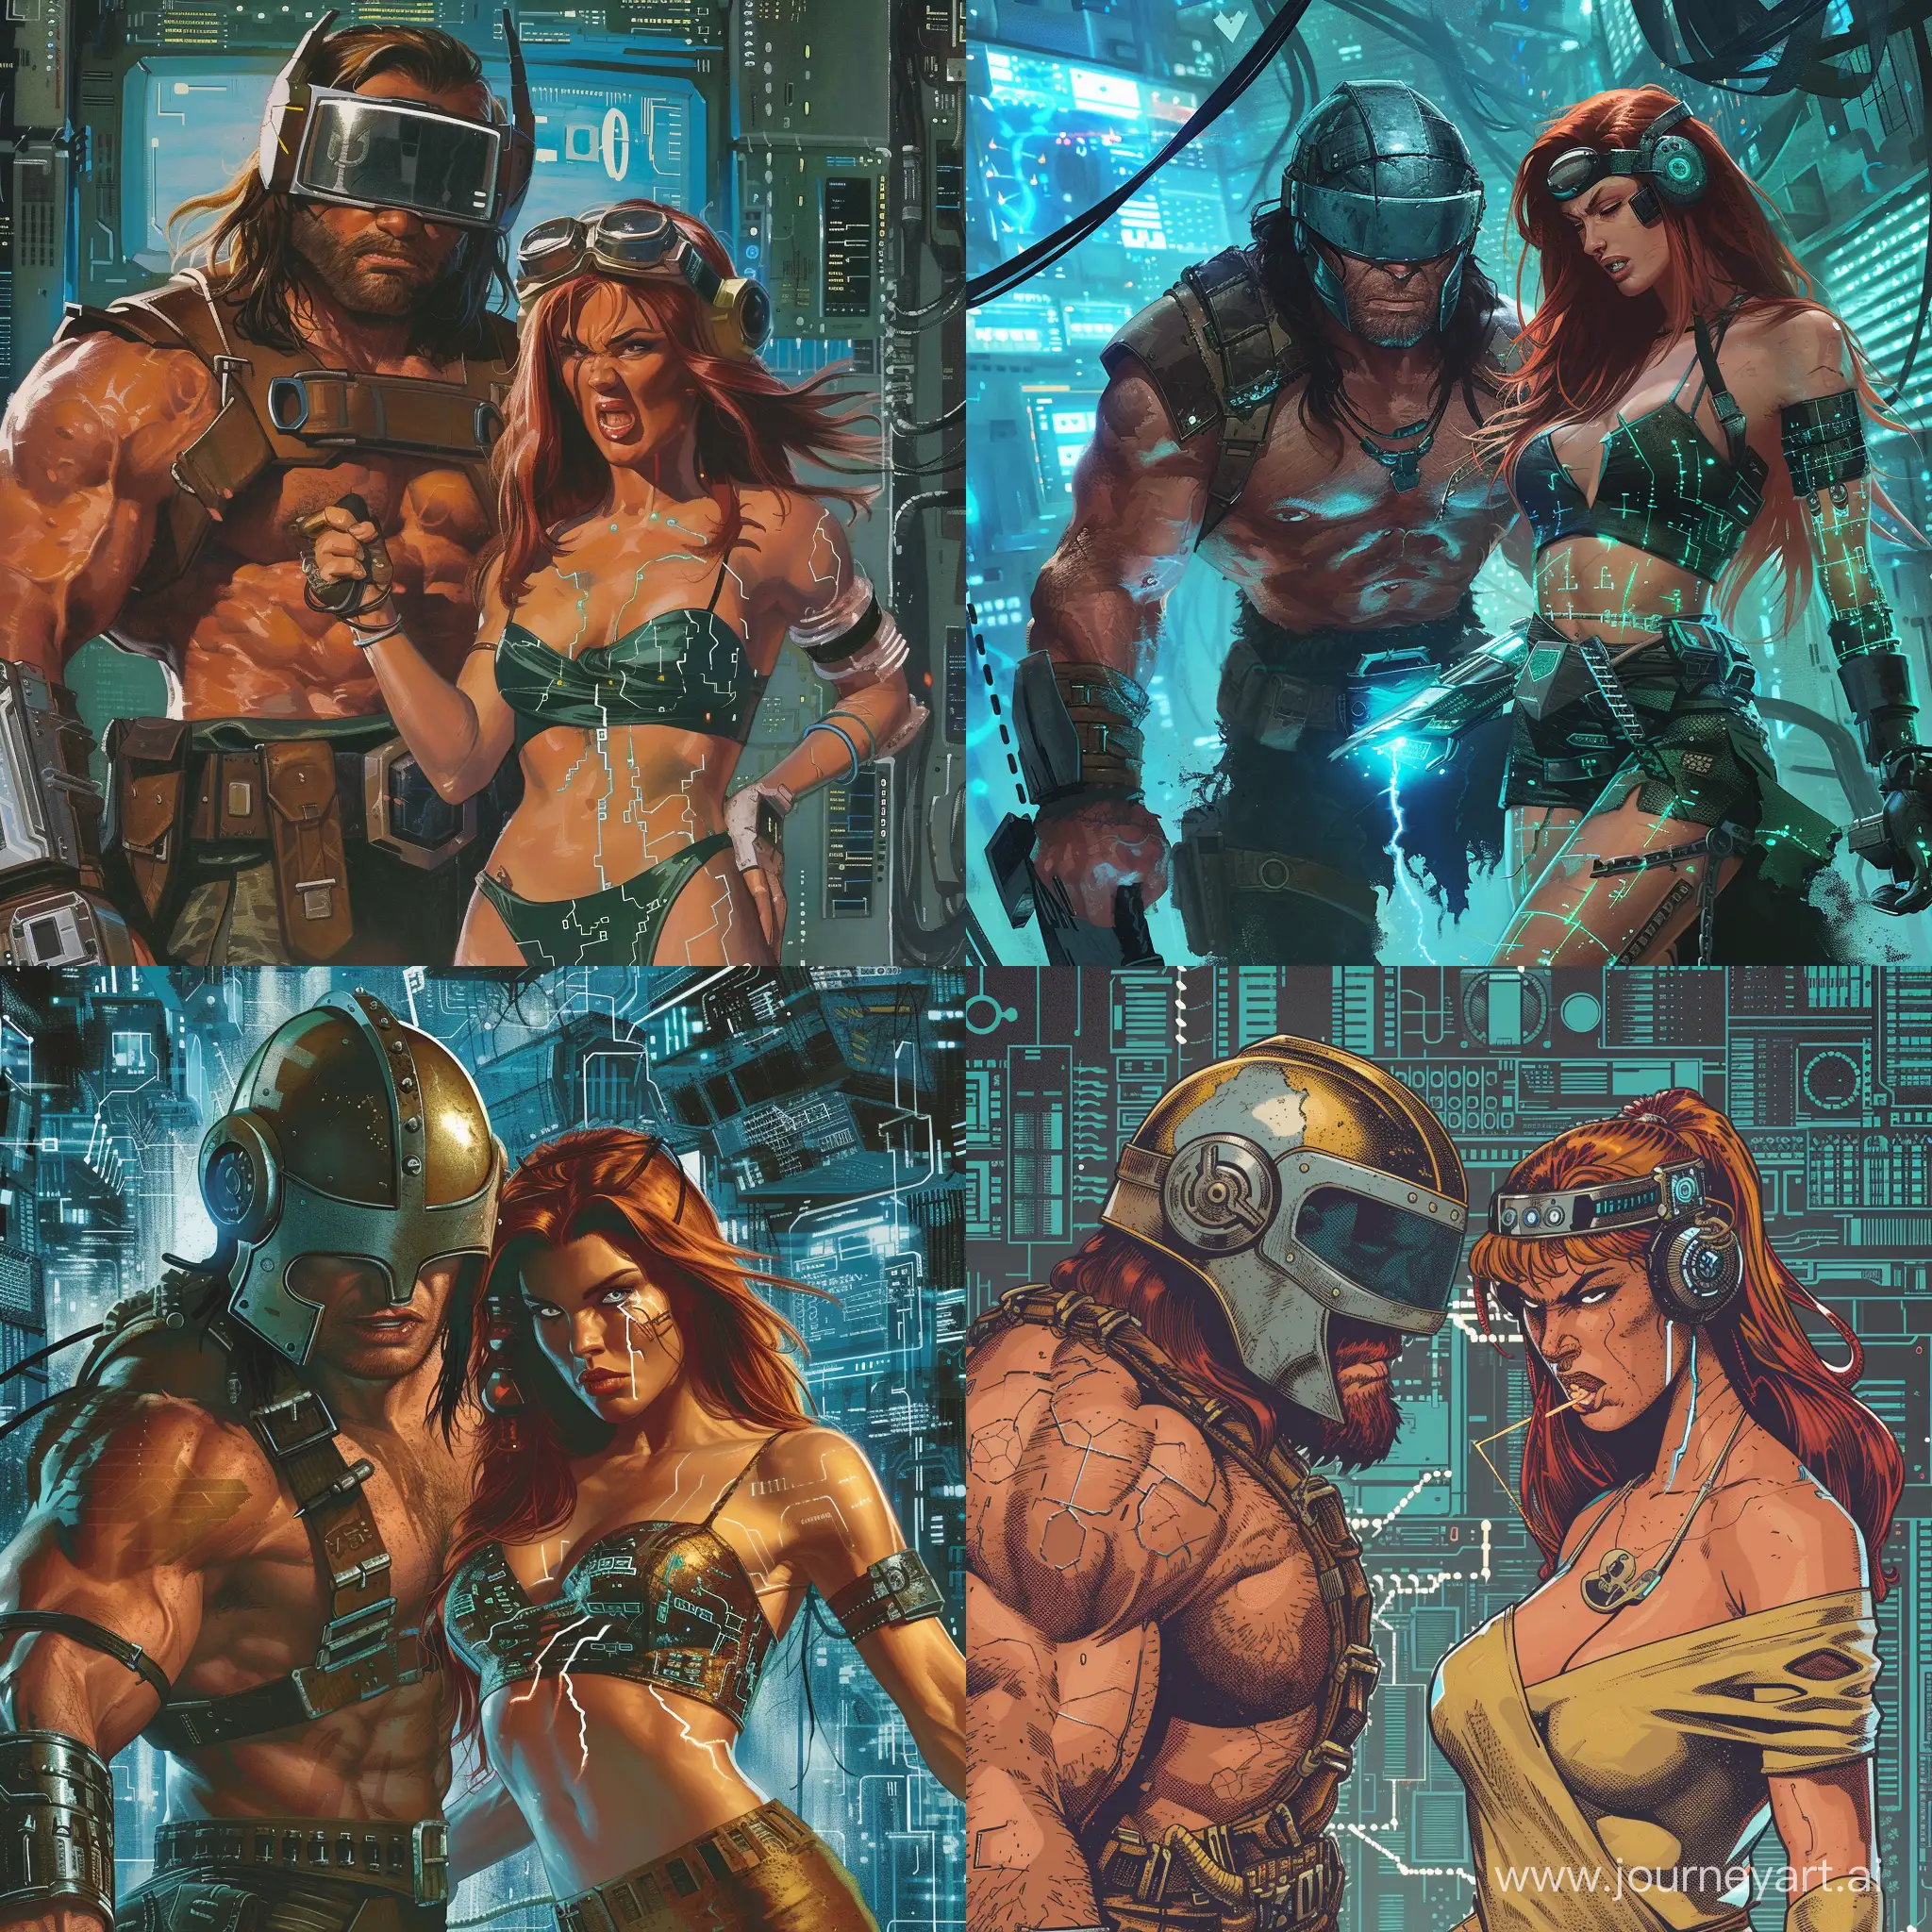 Conan the Barbarian in visor helmet catches angry normal weight Red-head woman in electrified cyberpunk clothing stealing computer secrets. High tech background.